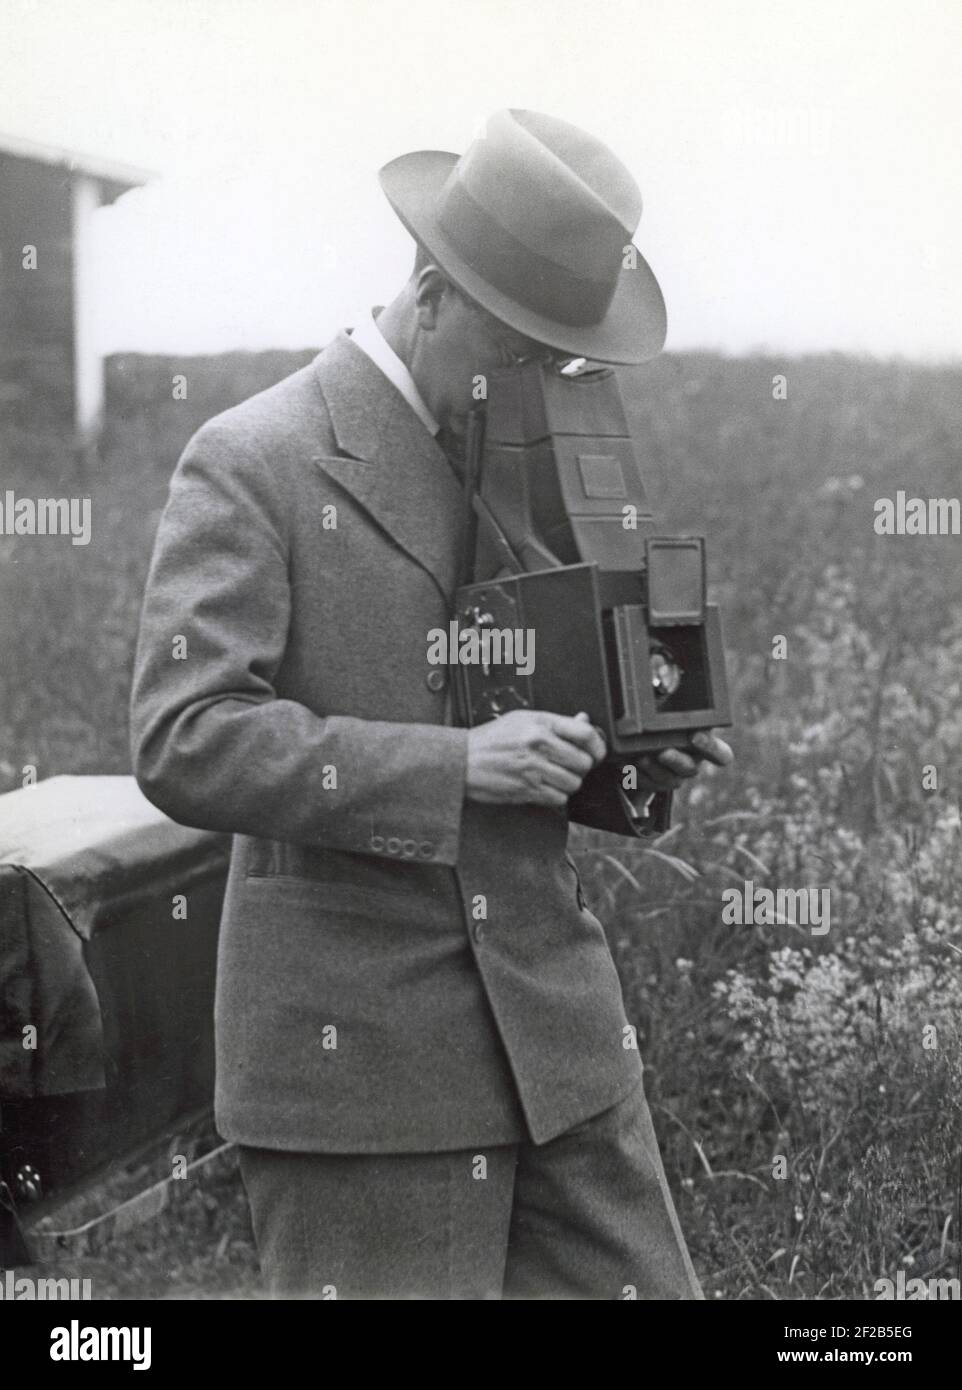 Camera history. Then being the crown prince of Sweden Gustaf Adolf was a keen amateur photographer. Pictured here with his camera aiming it at someone. Sweden 1930s Stock Photo